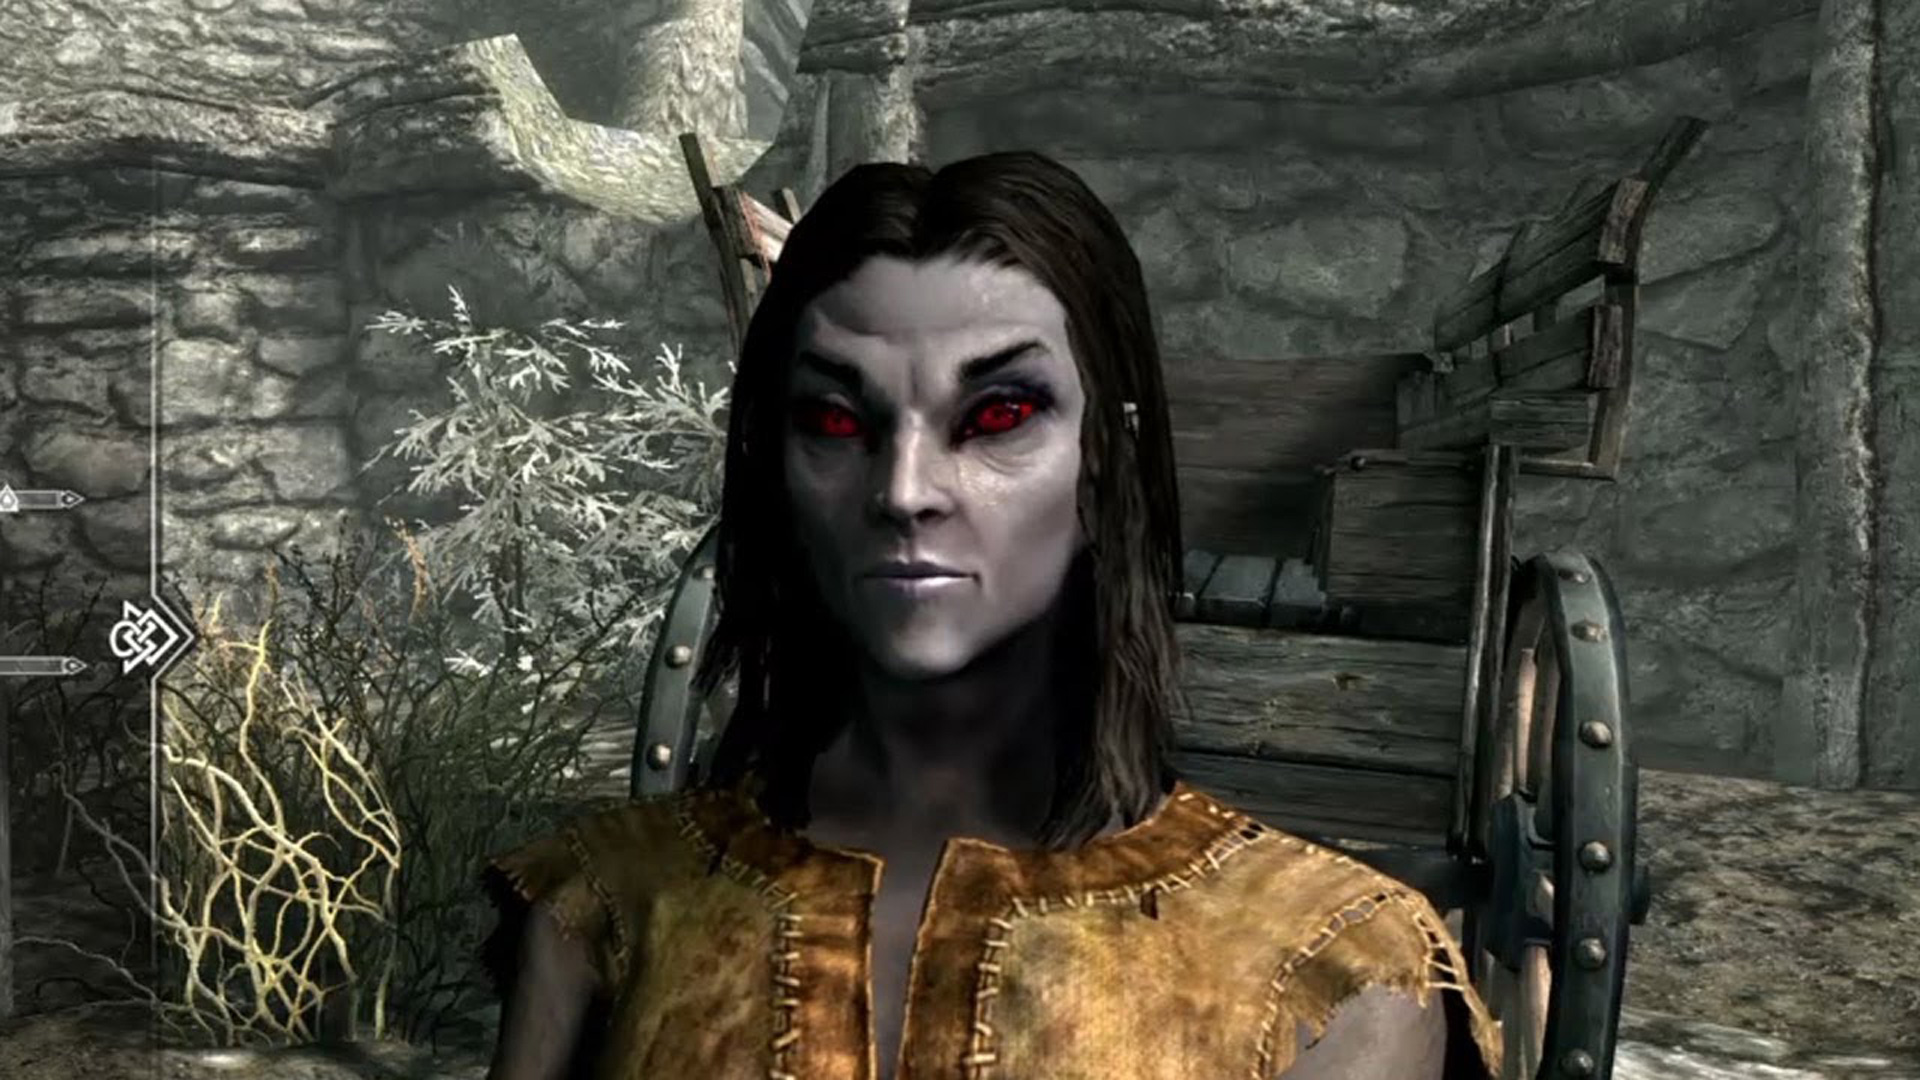 What are the best races in Skyrim?